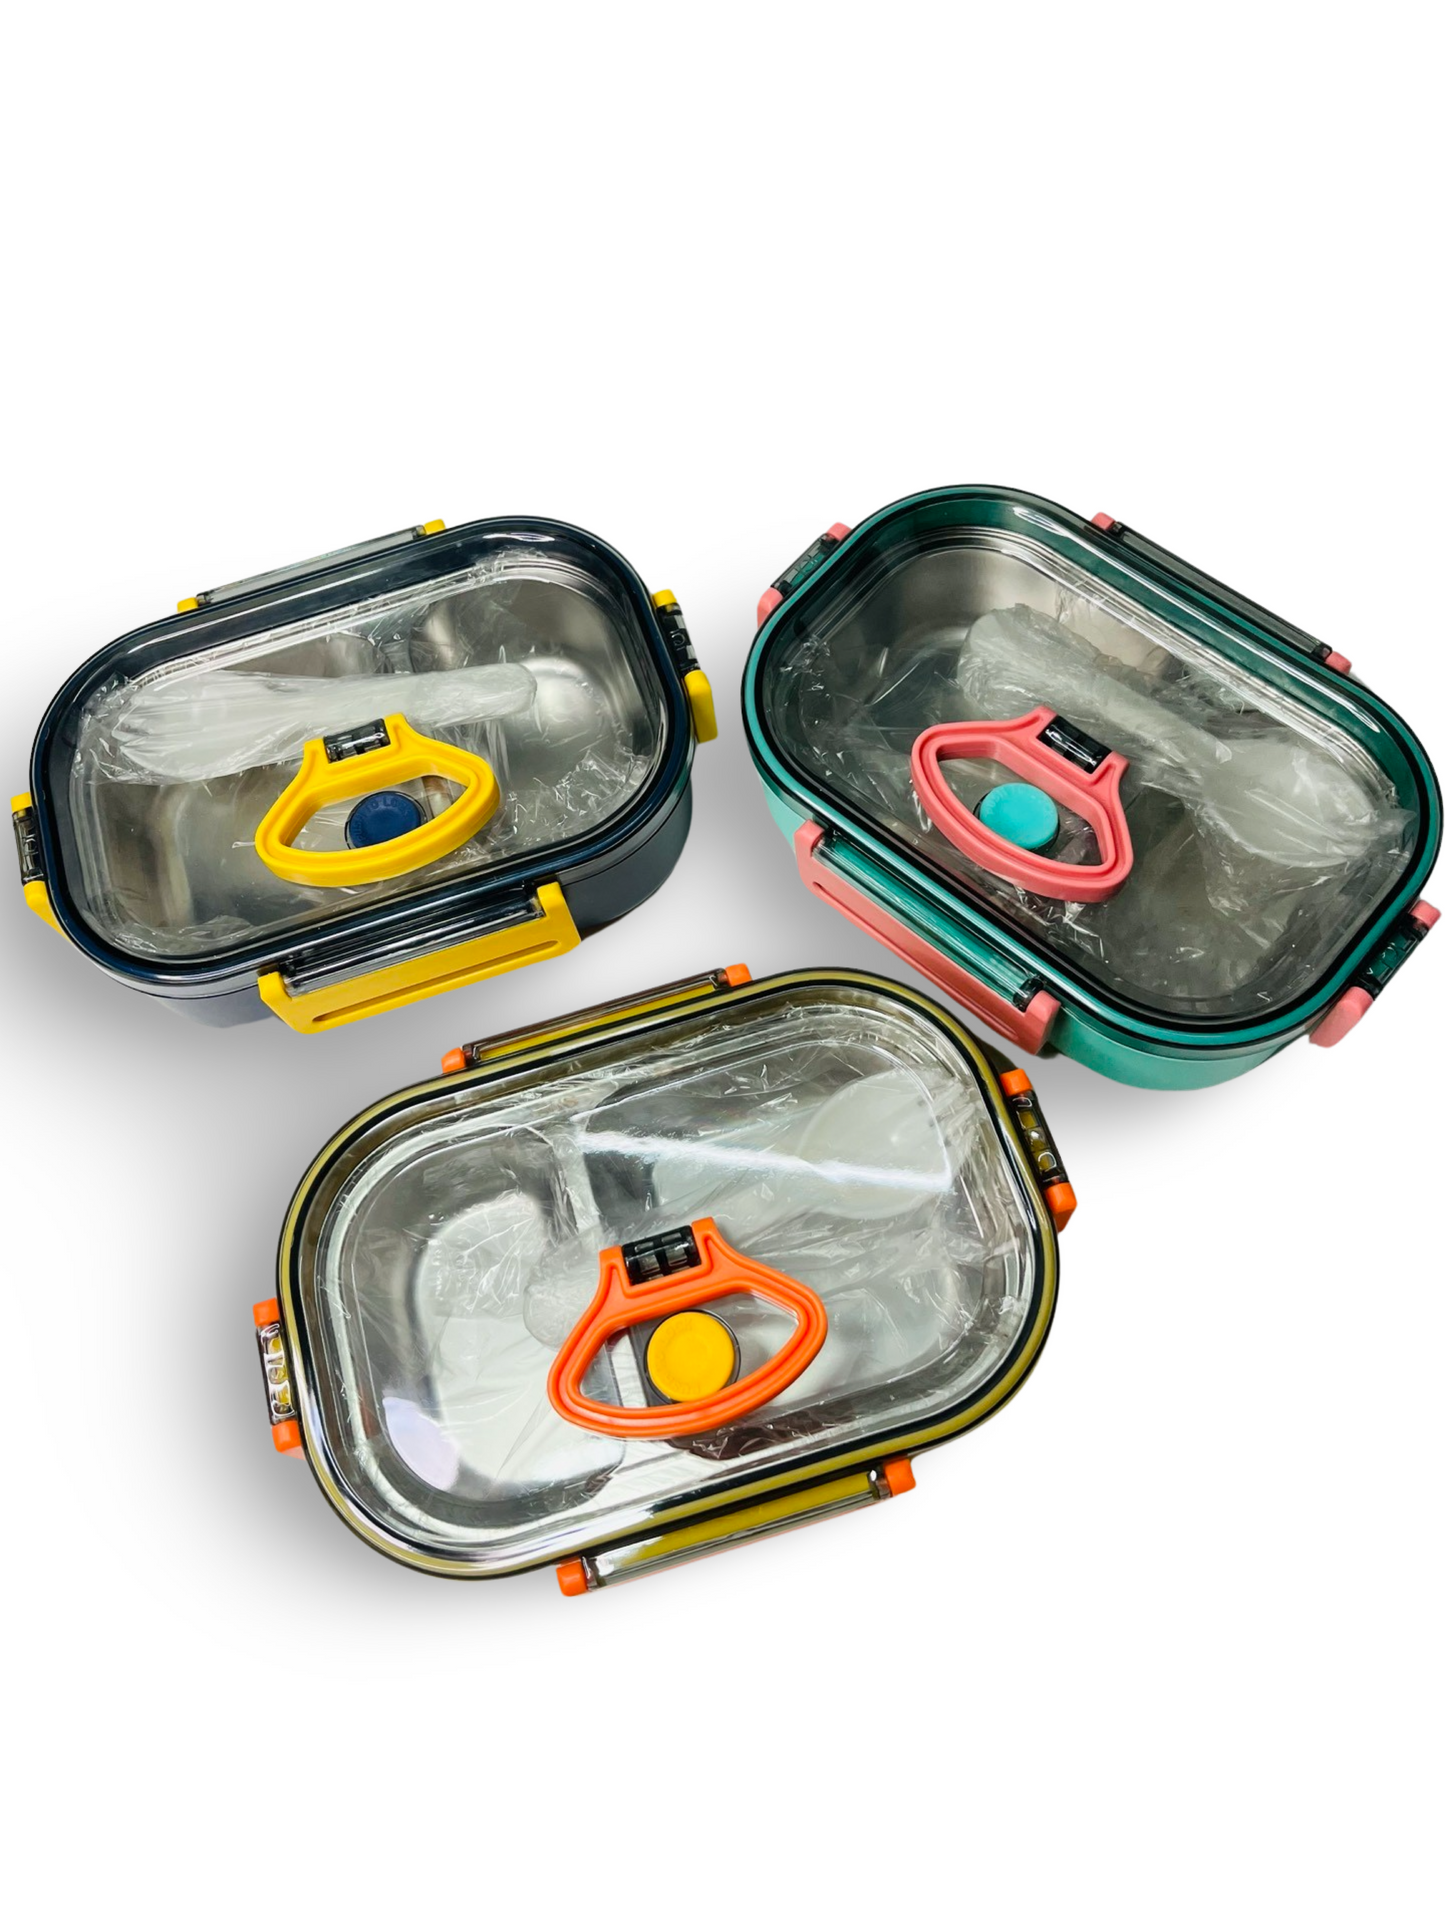 Stainless steel 2 compartment Lunch Box